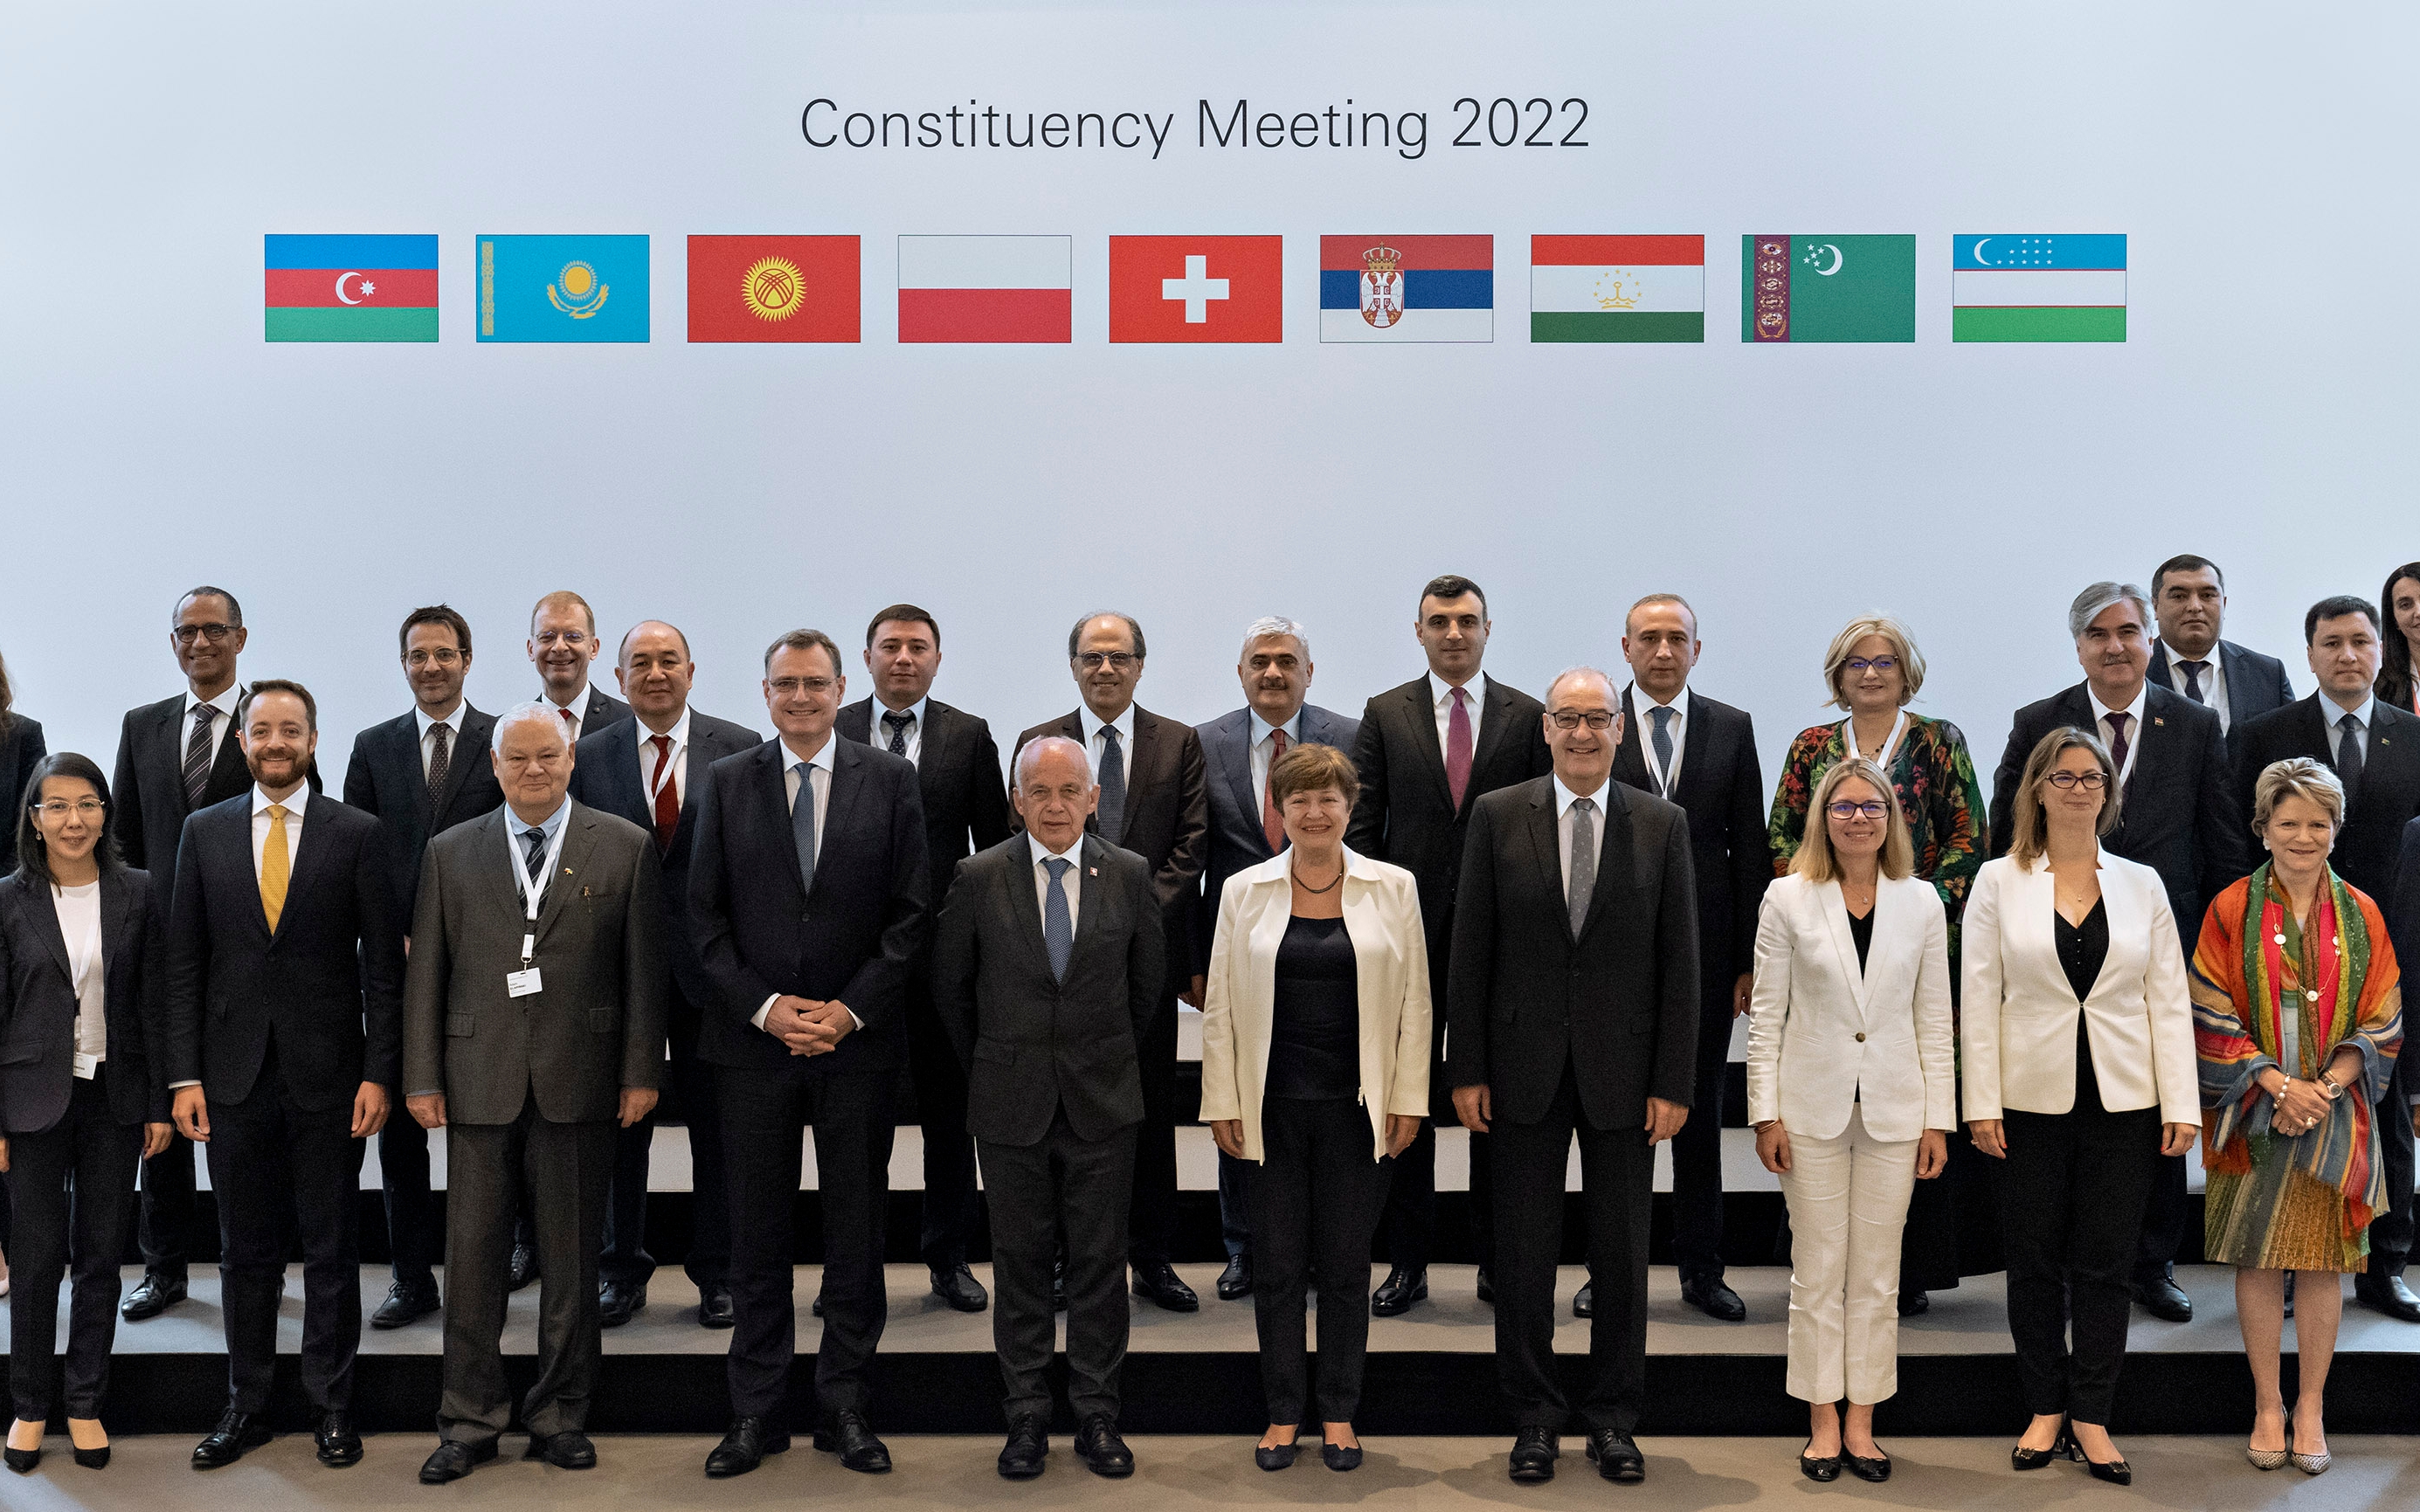 Meeting of the Swiss constituency at the Bretton Woods institutions in Bad Ragaz on 4 July 2022.